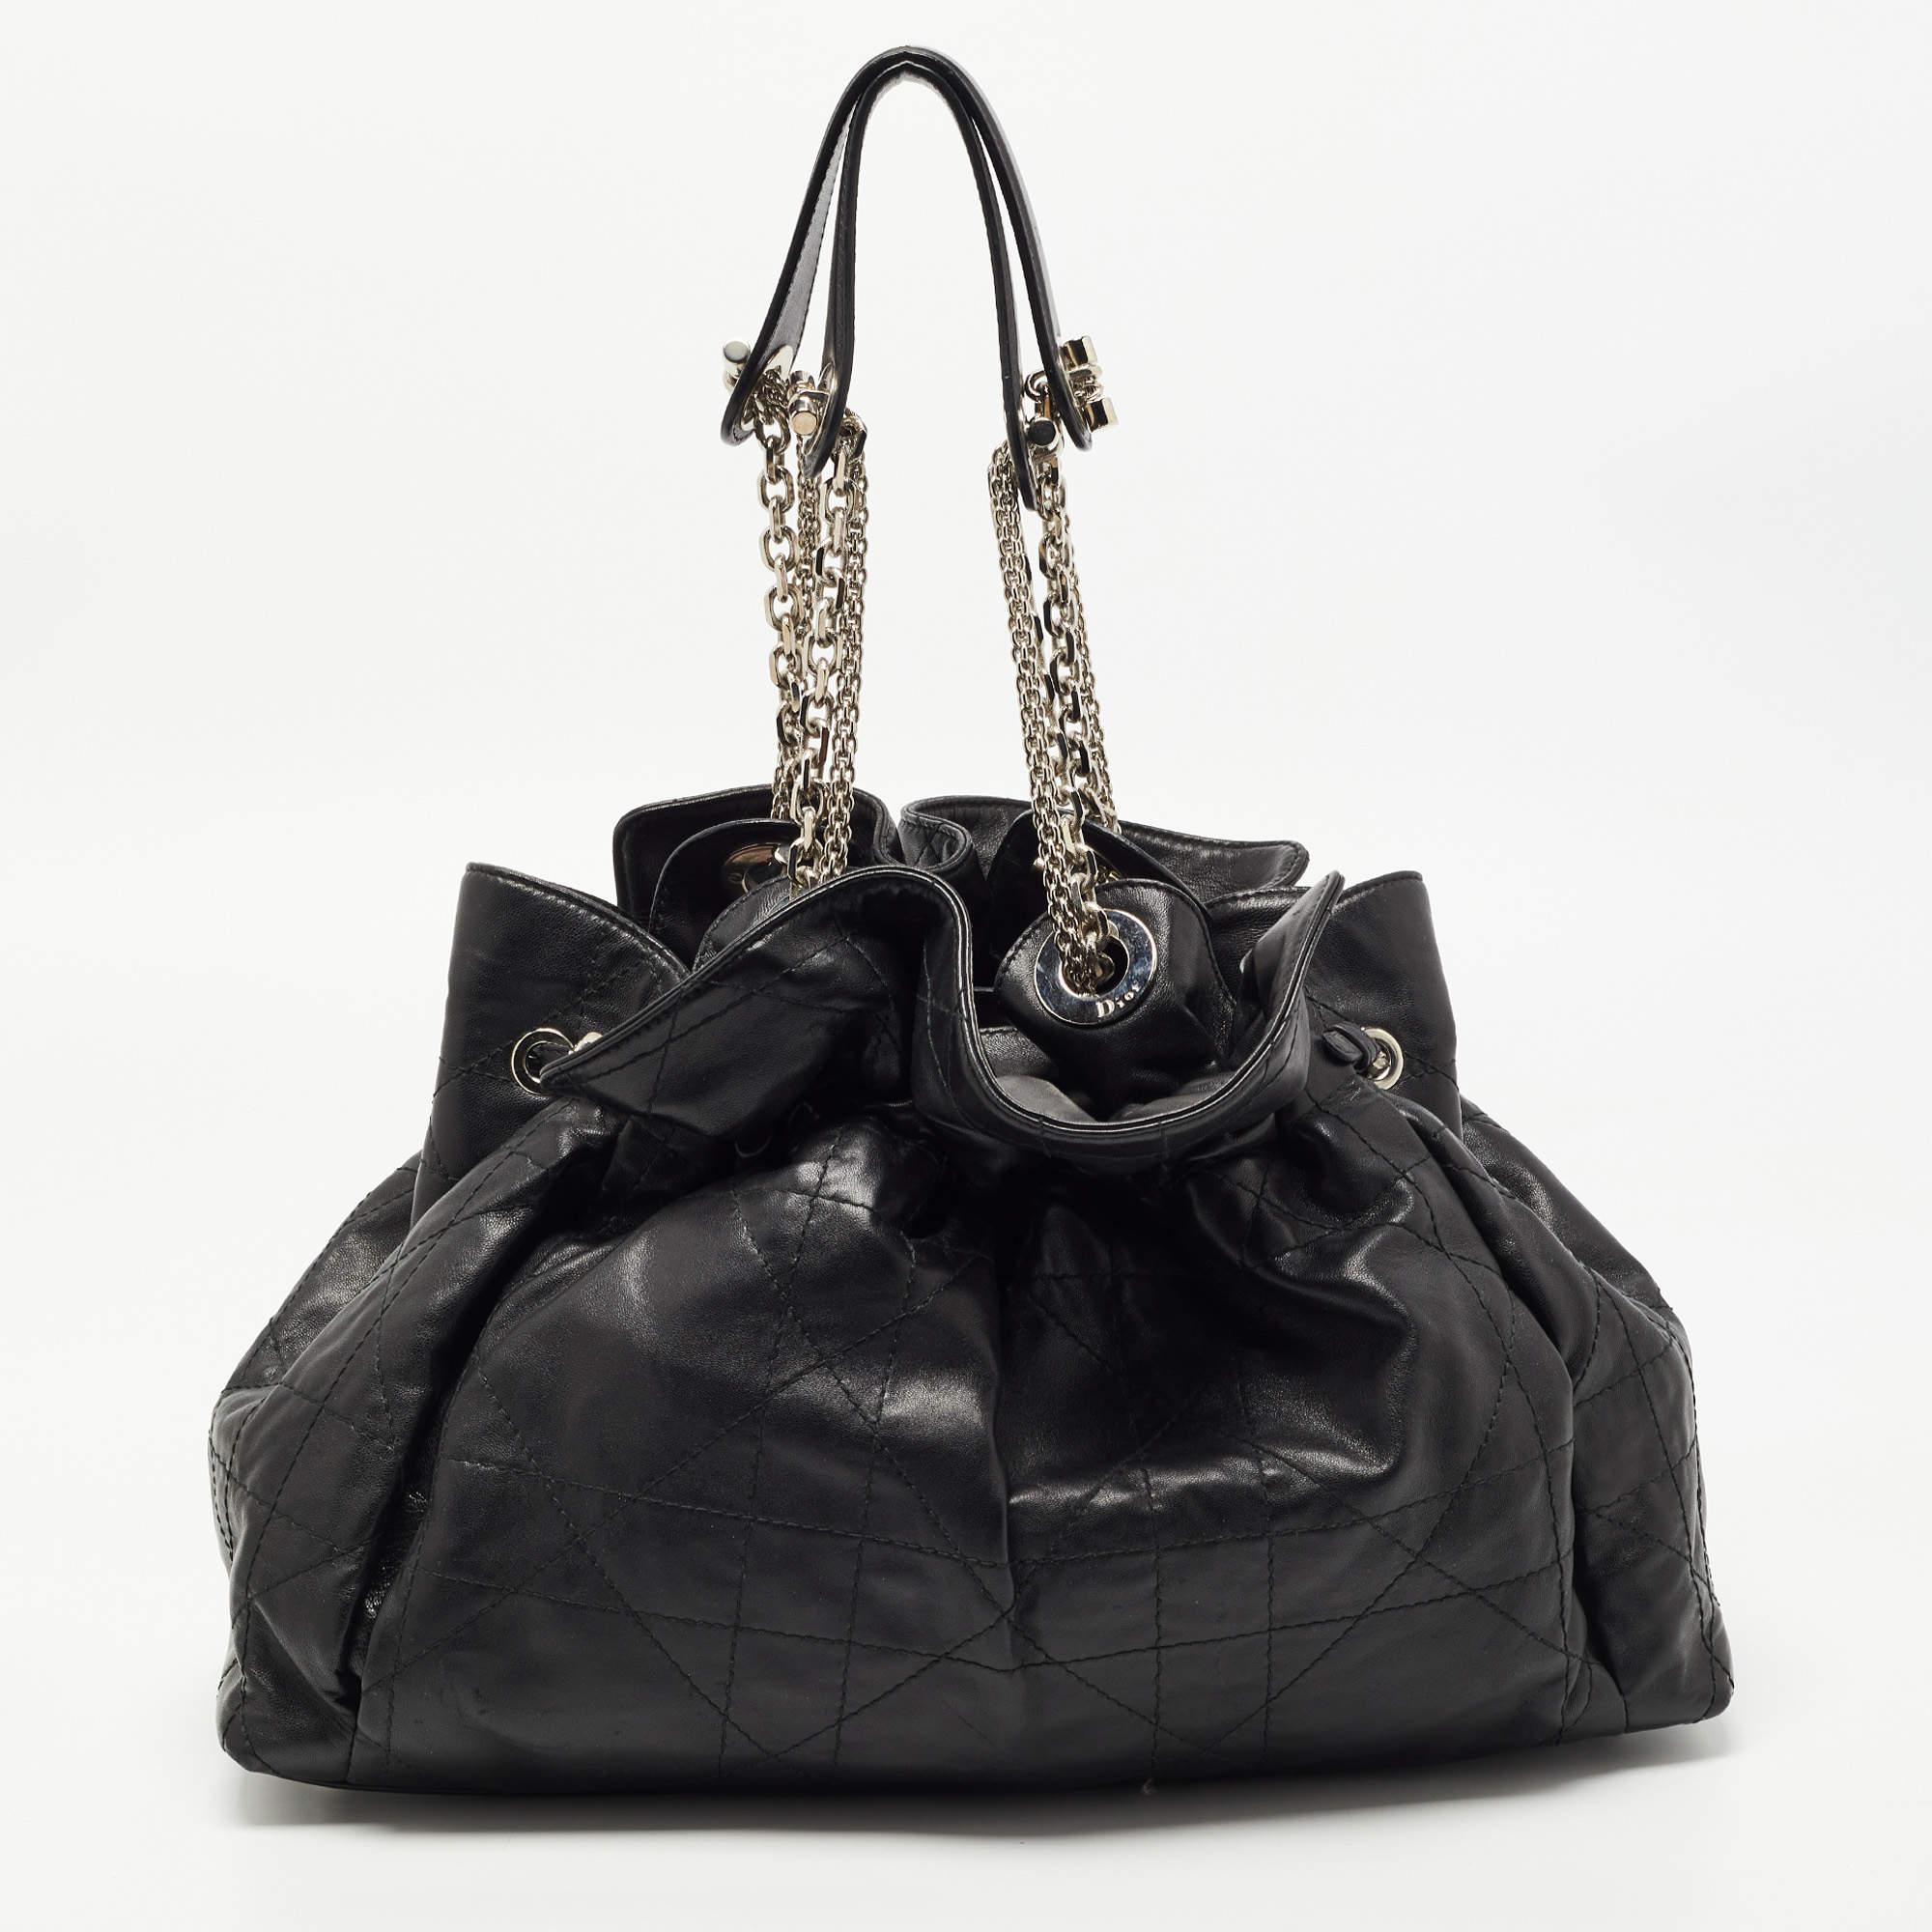 This stylish Le Trente hobo from Dior has been crafted from black leather. The bag features dual chain straps with leather shoulder rests, a CD cutout charm in silver-tone metal, a drawstring closure, and protective metal feet at the bottom. The